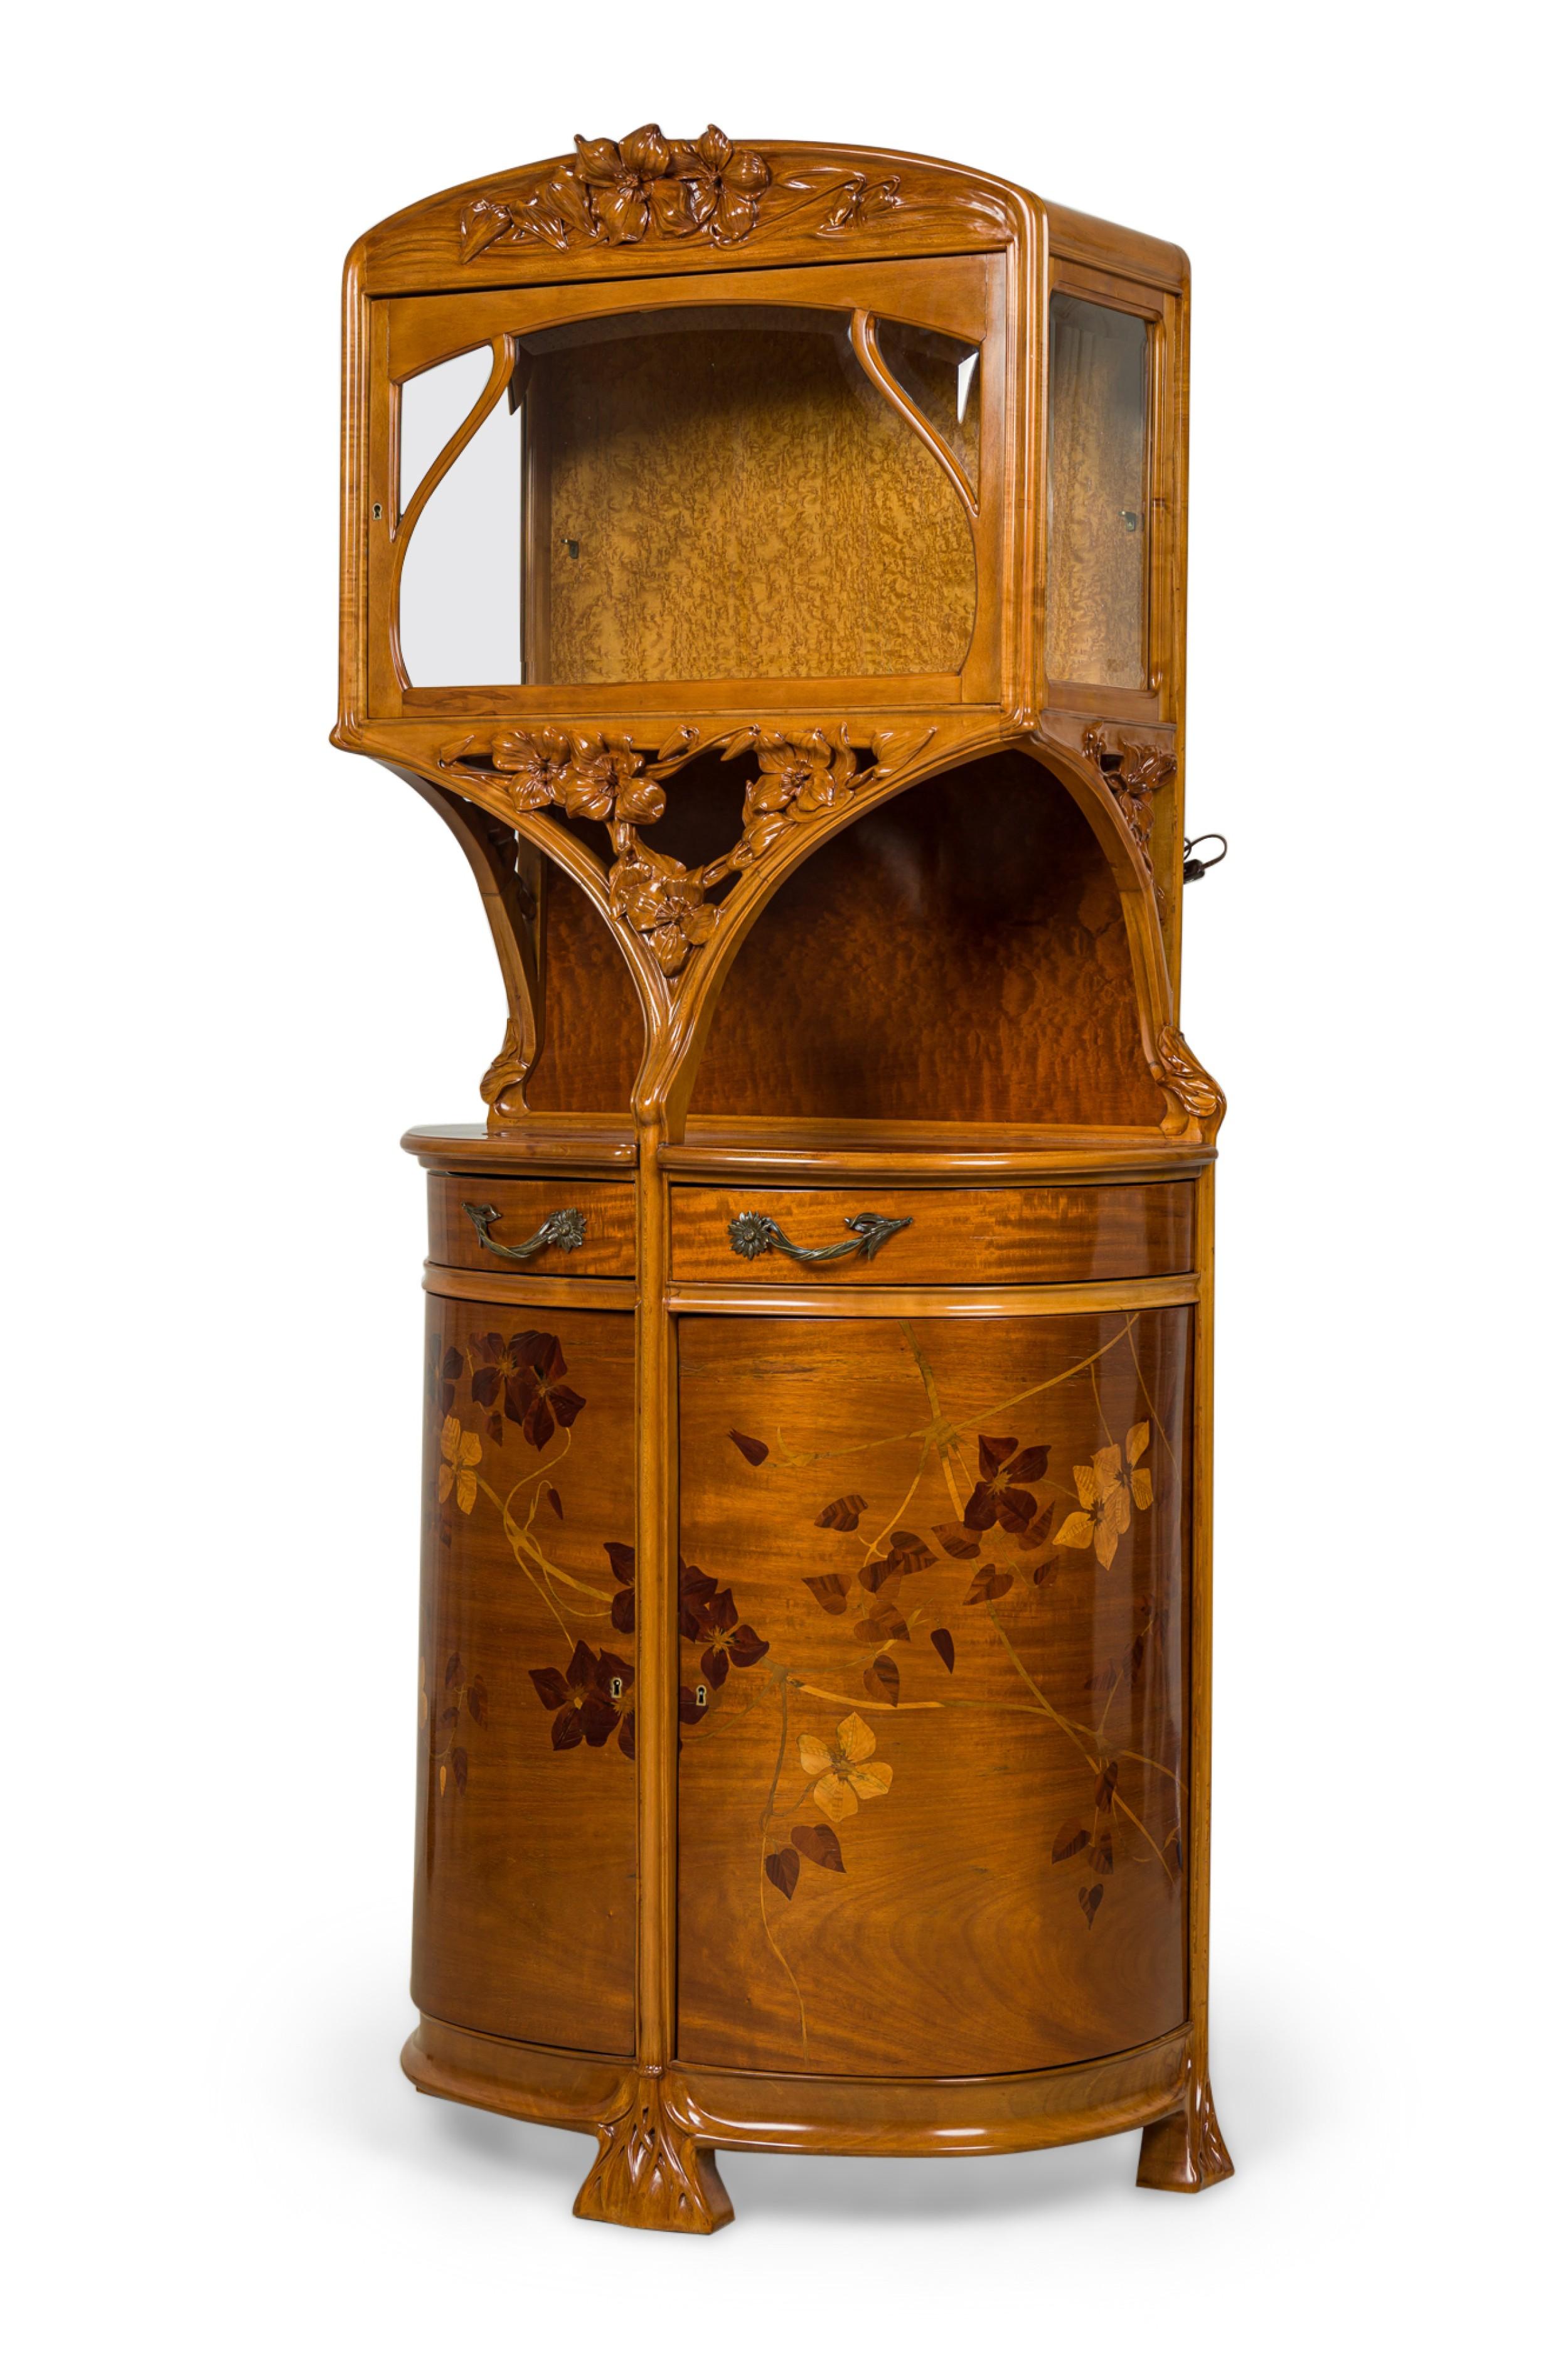 French Art Nouveau two-tier display cabinet / vitrine with a glass upper cabinet topped with an elaborately carved floral crest over an open compartment, resting on a lower demilune closed cabinet featuring two upper pivoting drawers with bronze